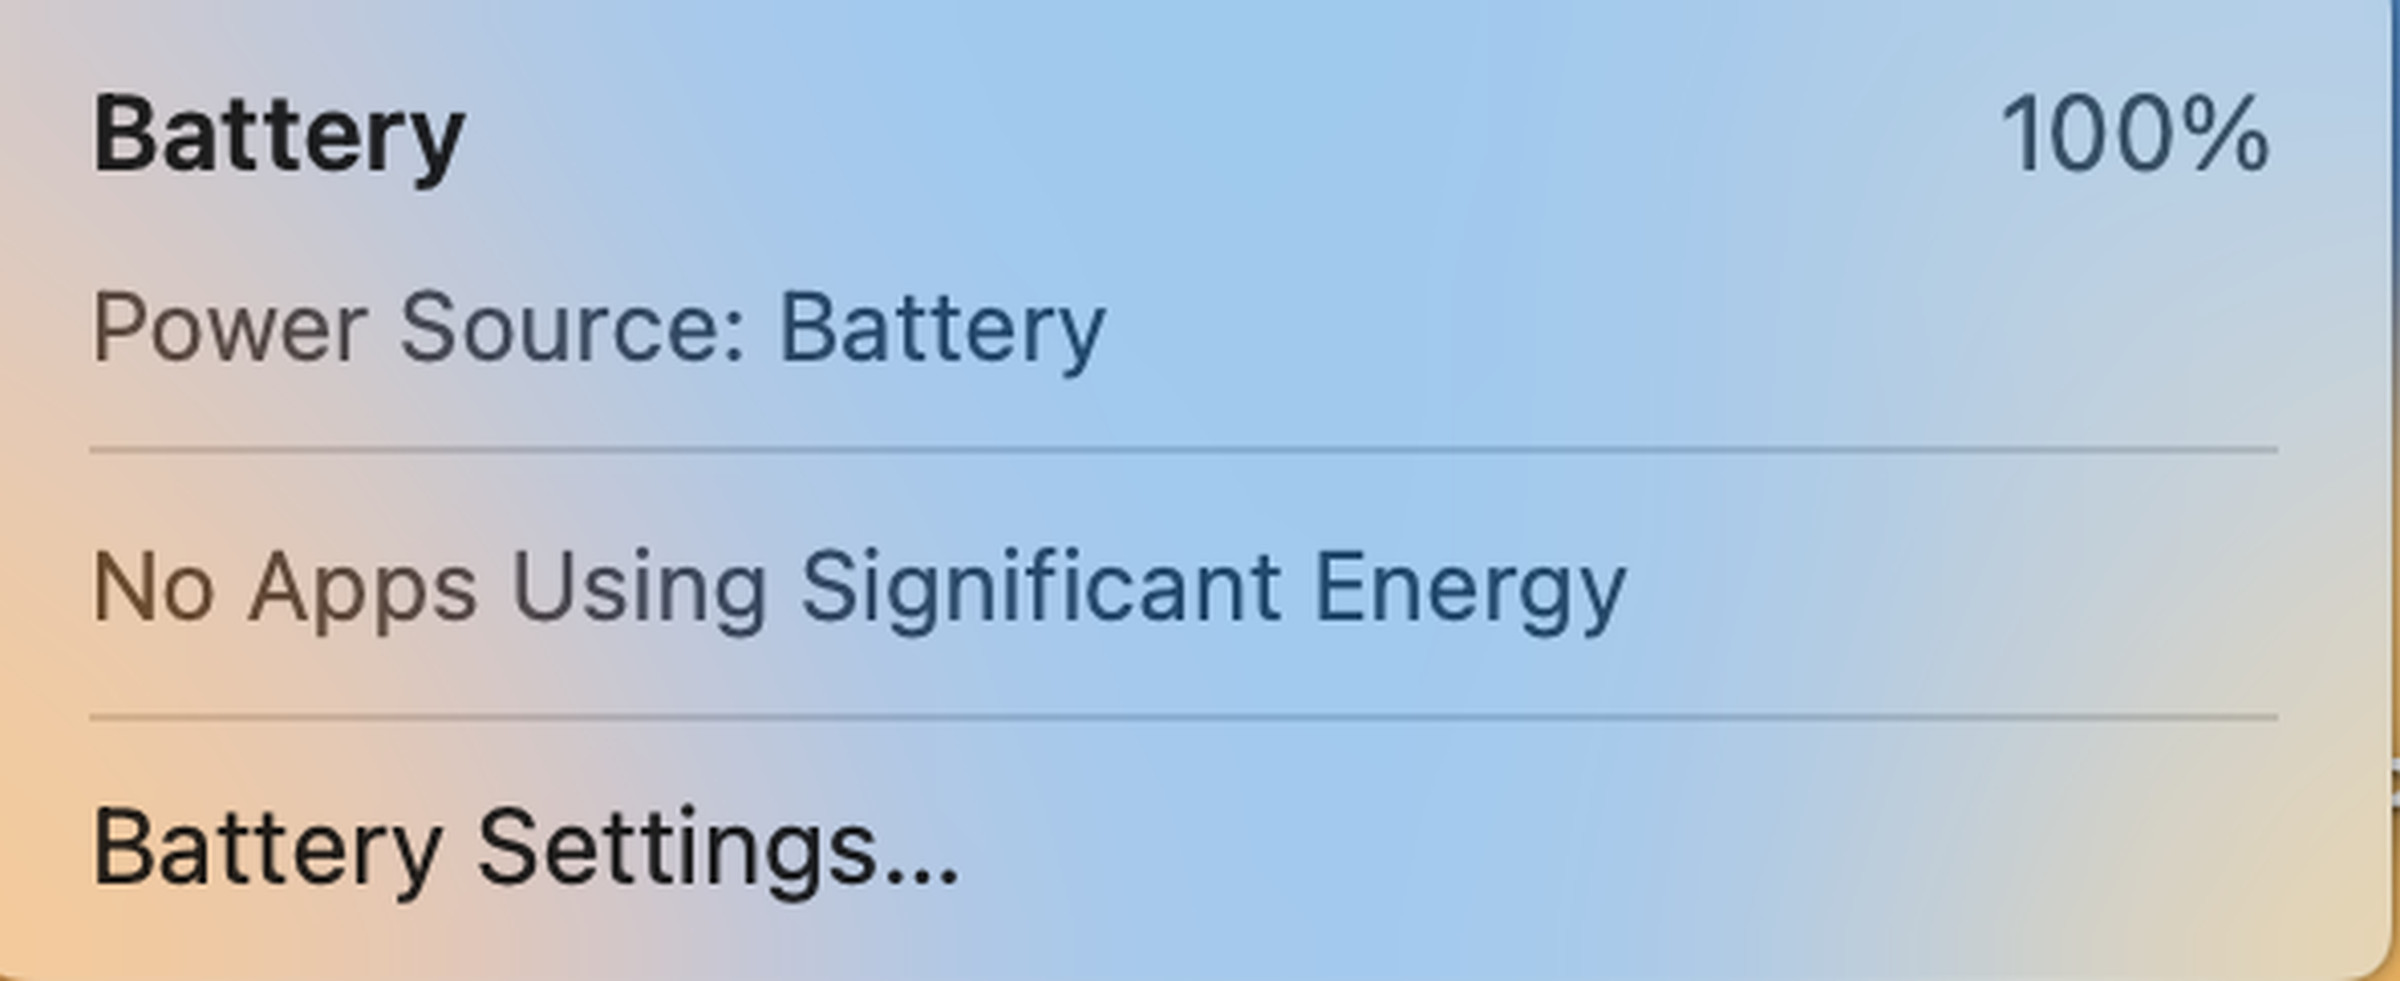 A screenshot of the battery meter on the MacBook Pro showing 100%.